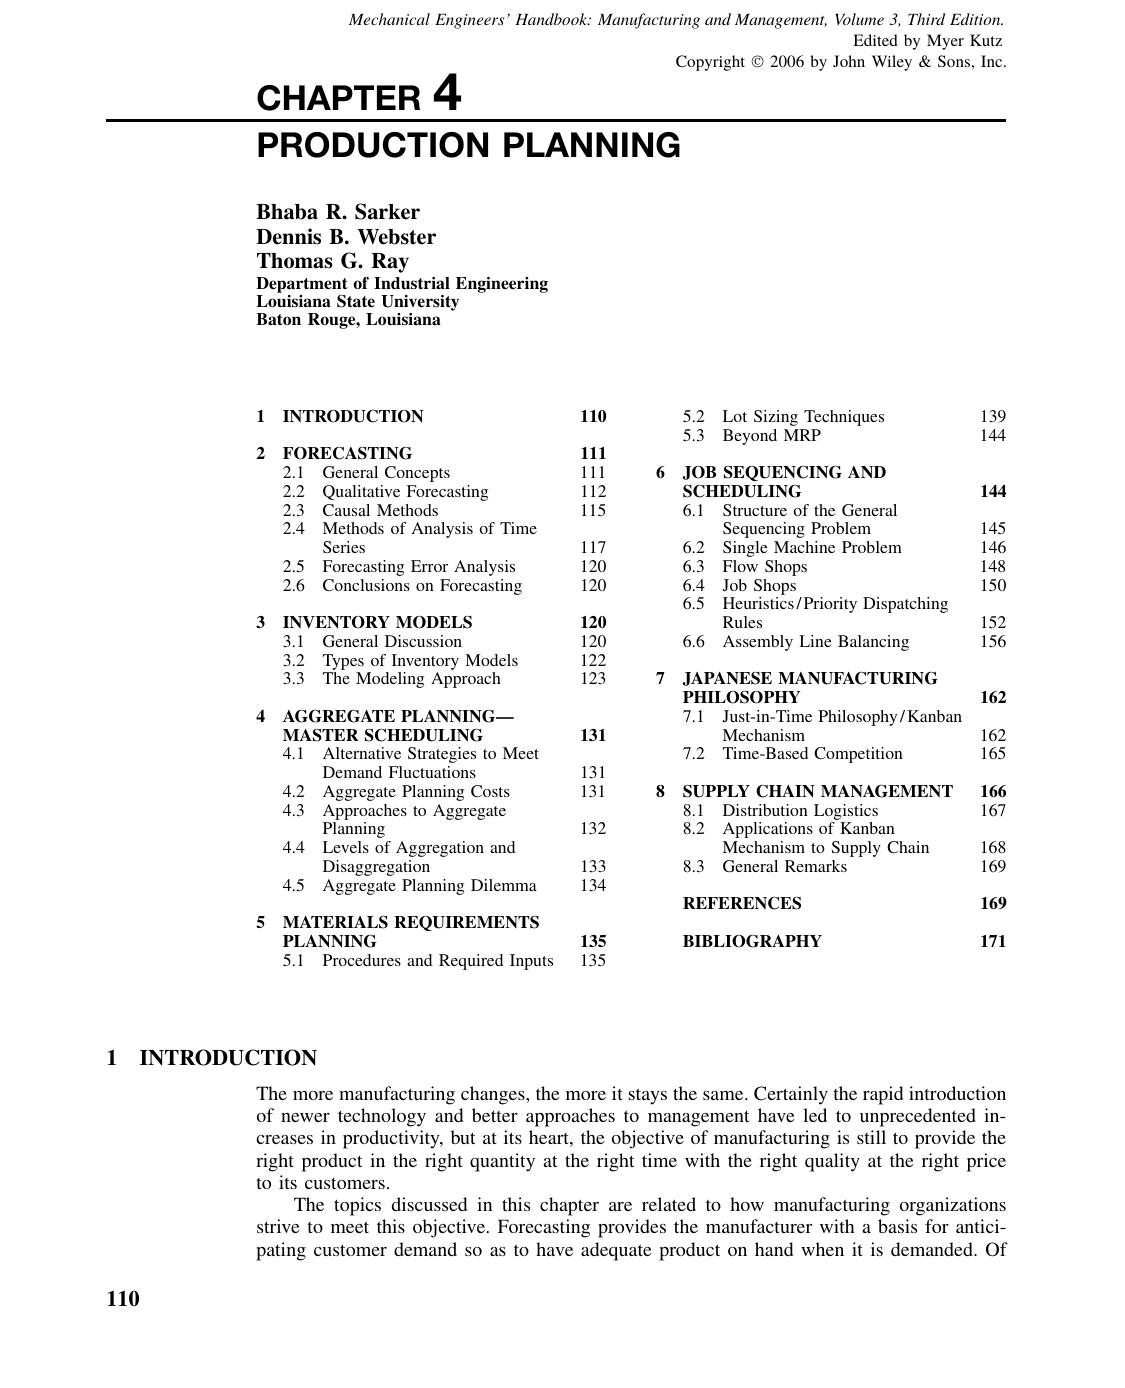 Production Planning by penta